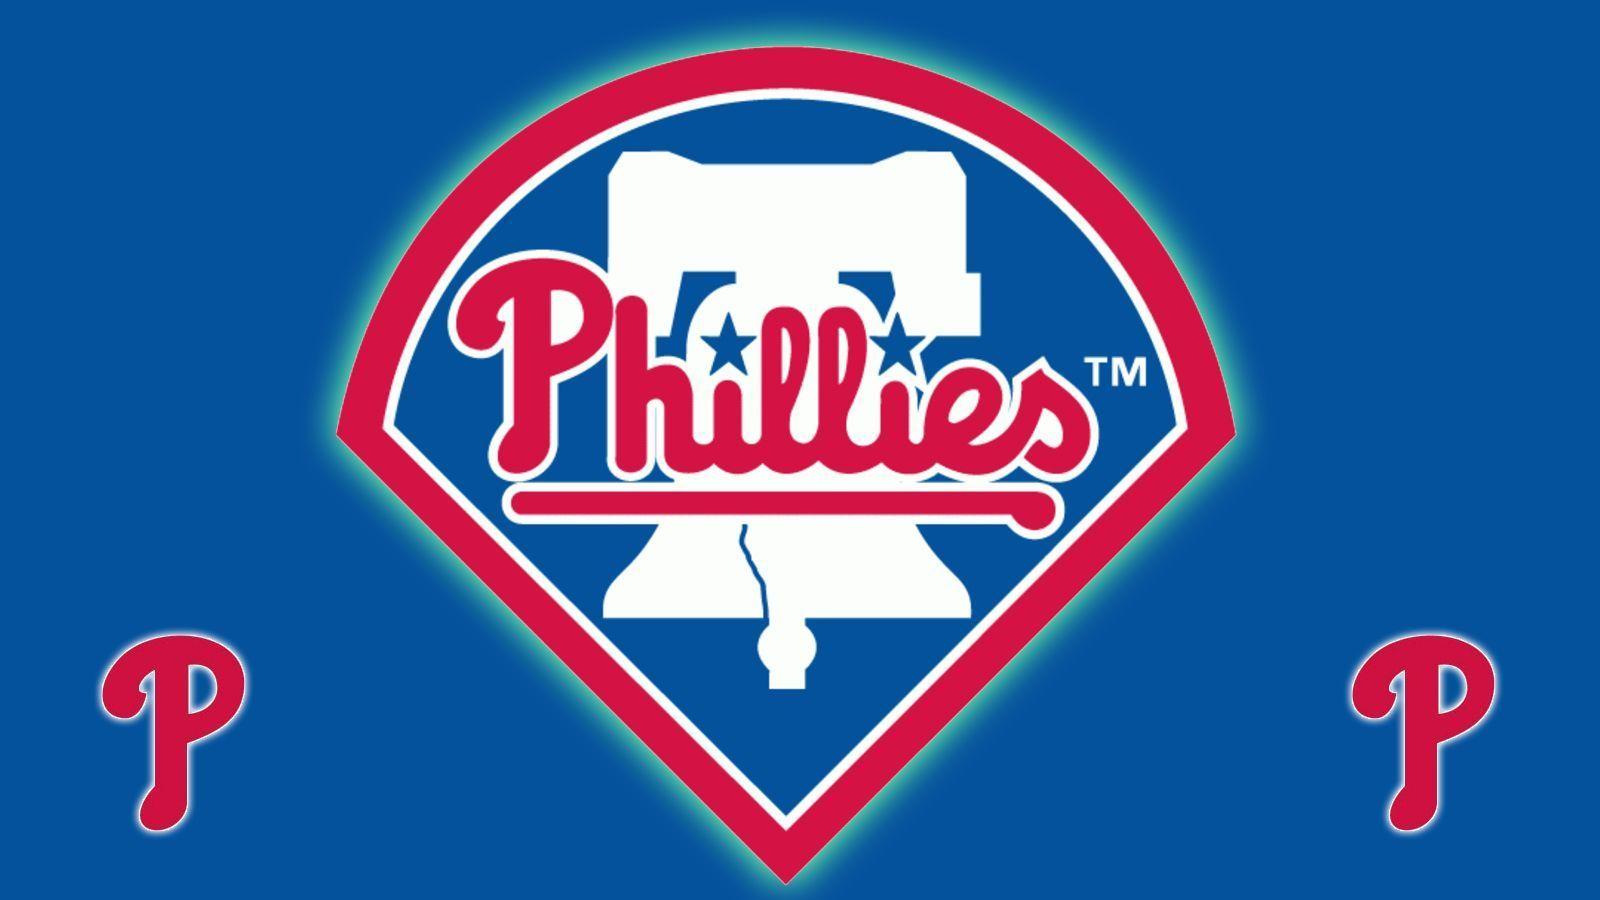 Phillies Logo Wallpaper Image & Picture